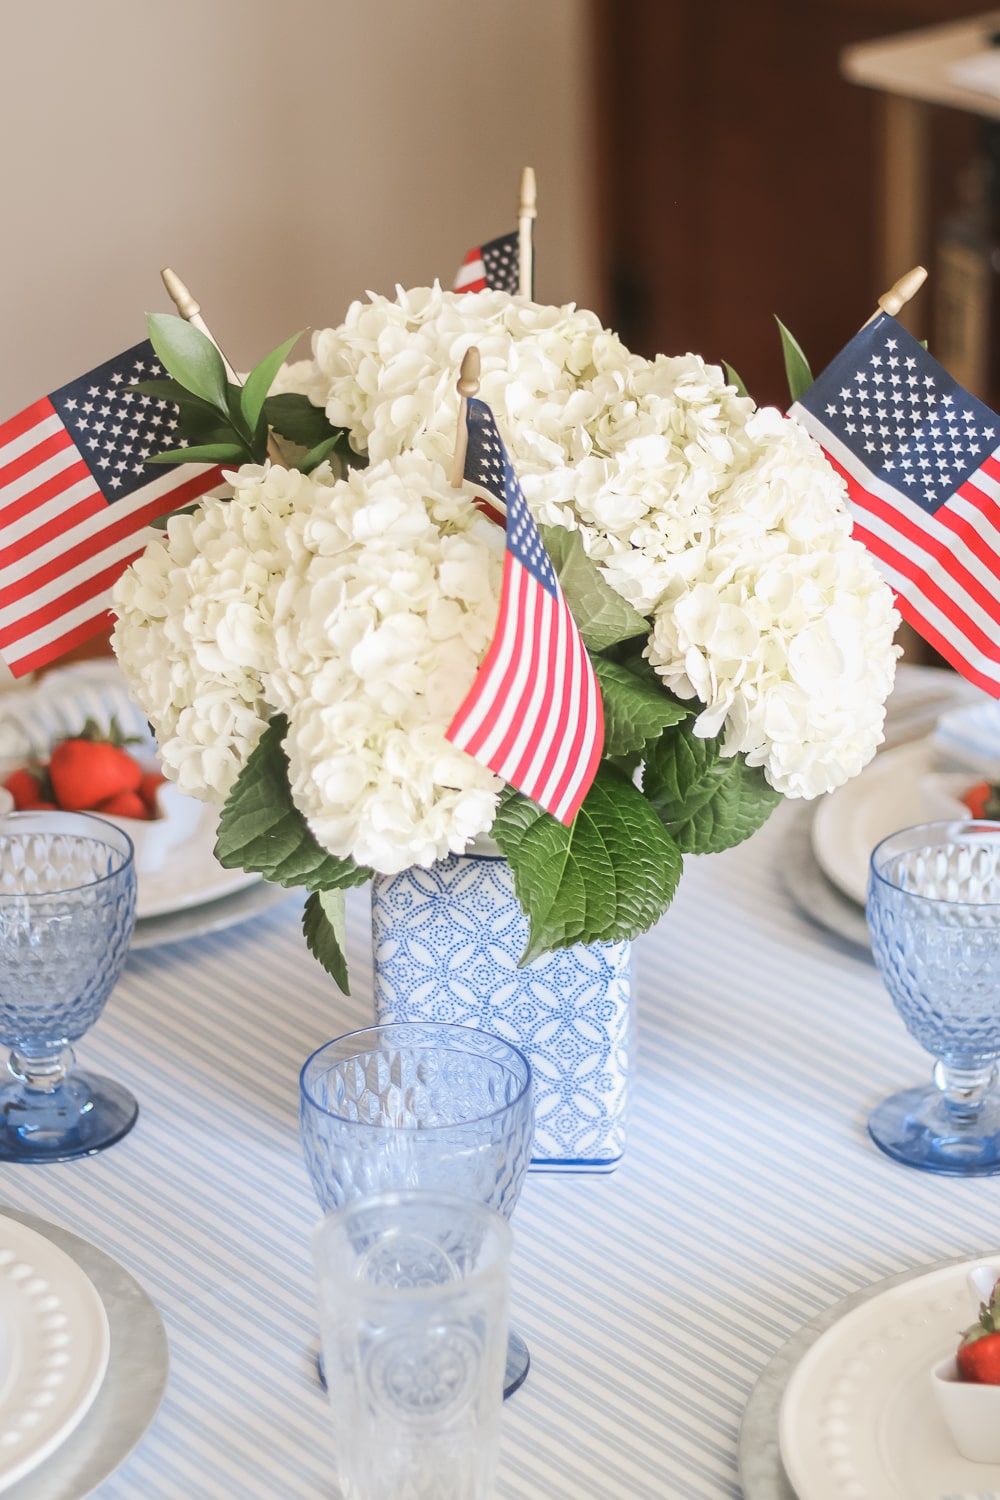 4th of July hydrangea centerpiece arranged in a blue and white ginger jar by blogger Stephanie Ziajka on Diary of a Debutante